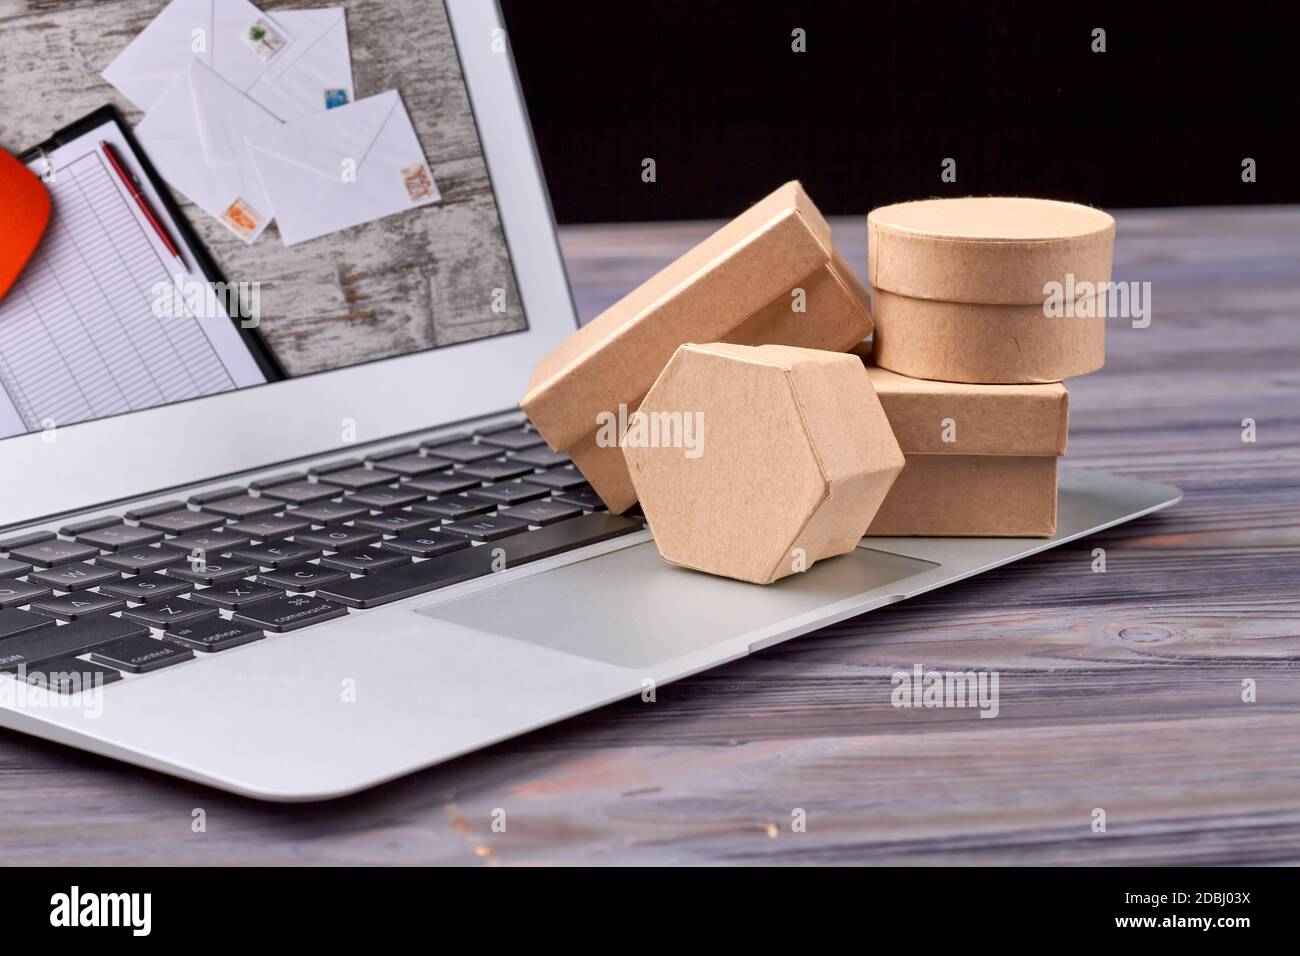 Packaging paper and shipping boxes on laptop. Stock Photo